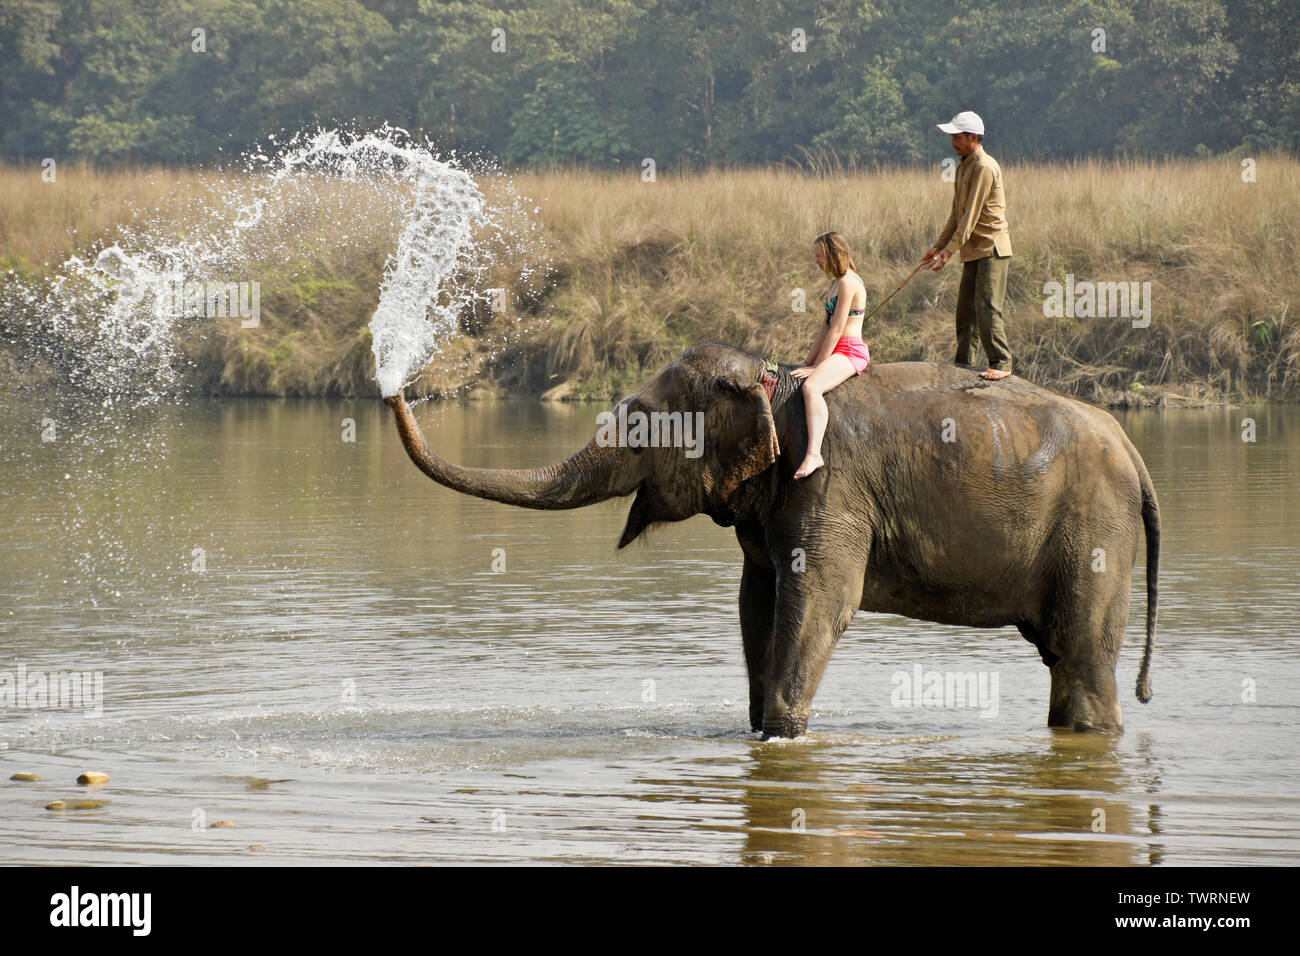 Female tourist and mahout on Asian elephant spraying water in Rapti River, Chitwan National Park, Nepal Stock Photo